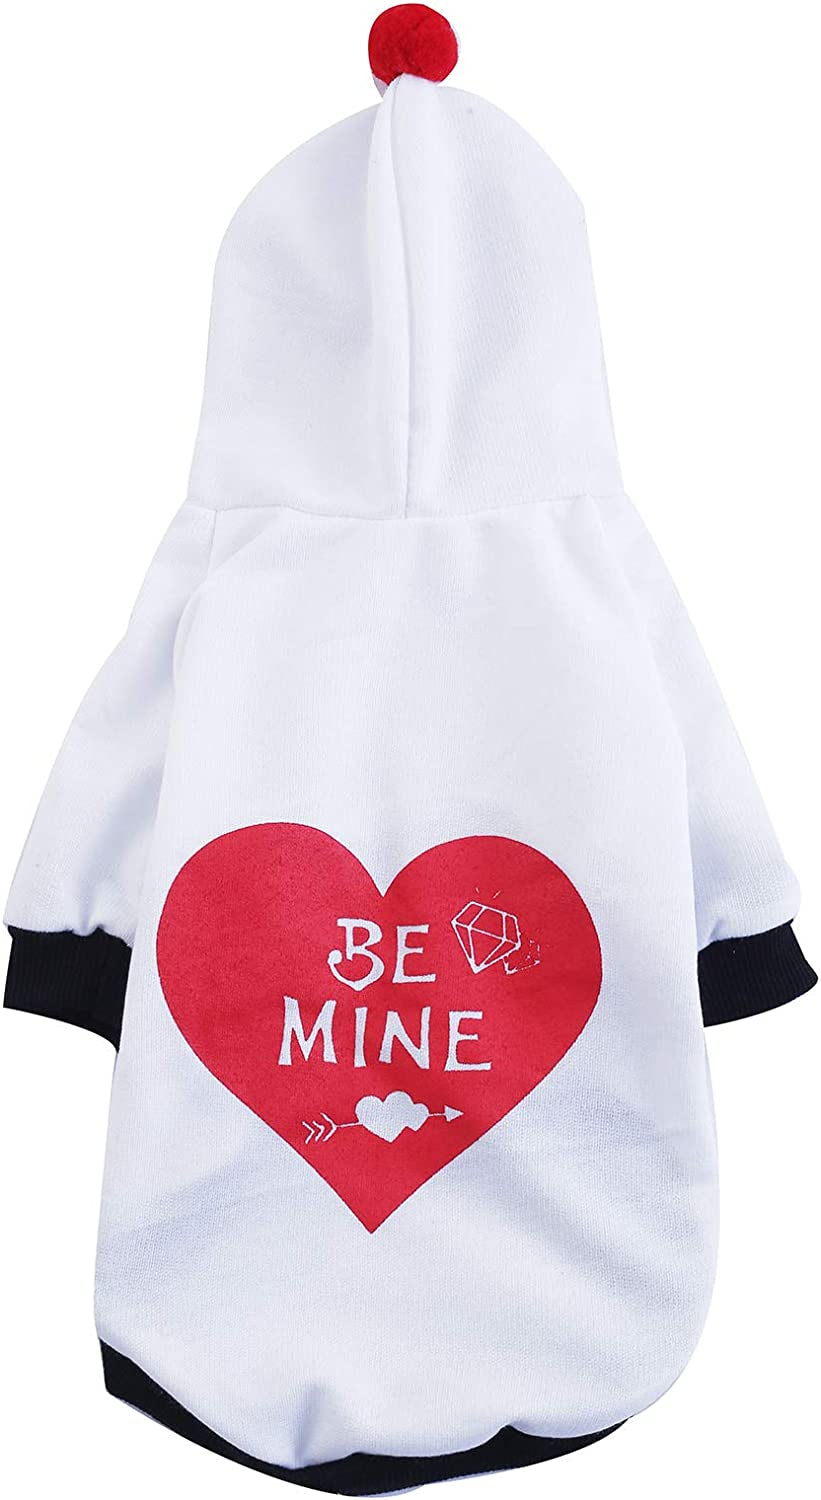 Impoosy Valentine'S Day Pet Dog Hoodies Funny Heart Shirt Cute Puppy Costume Clothes for Small Medium Dogs Cats Pets (S)